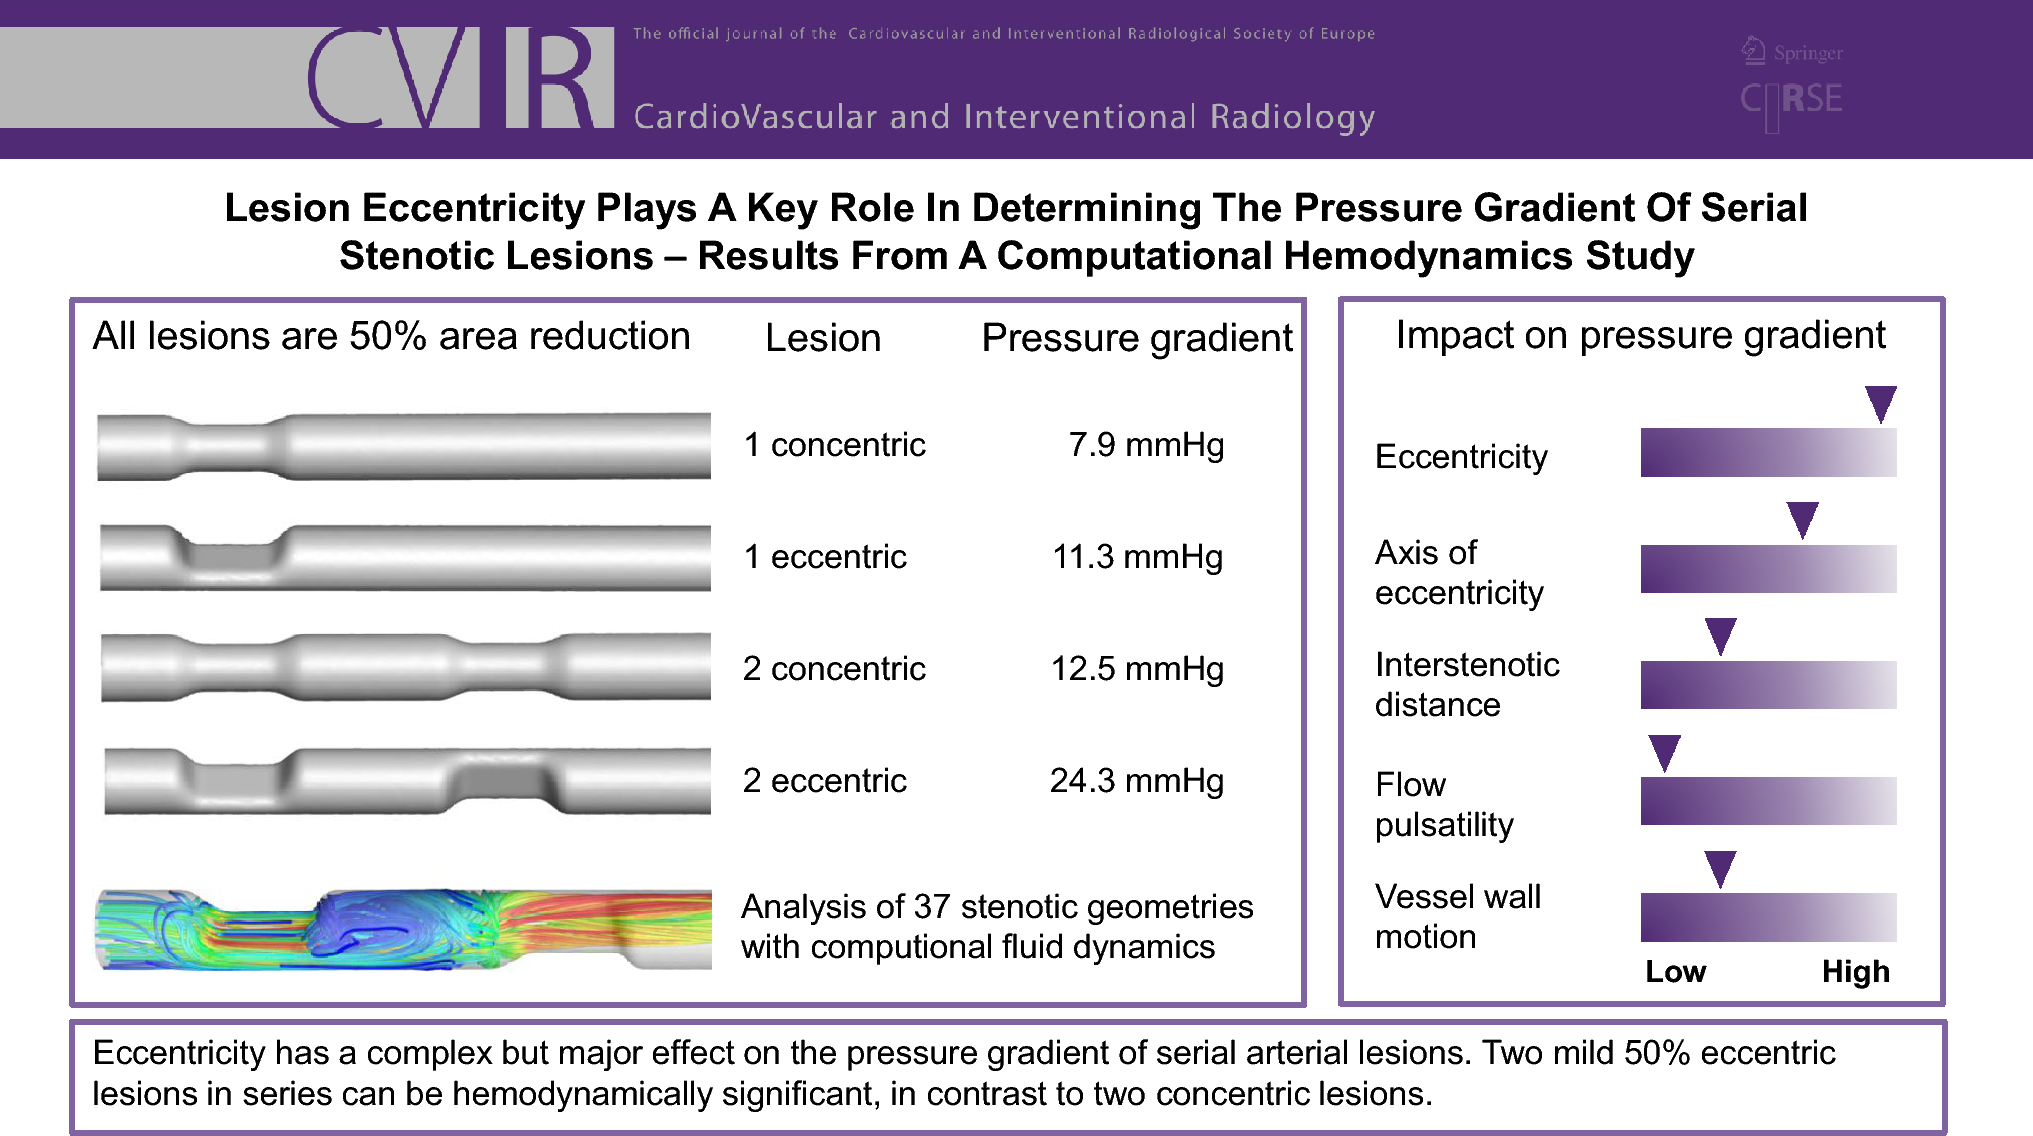 Lesion Eccentricity Plays a Key Role in Determining the Pressure Gradient of Serial Stenotic Lesions: Results from a Computational Hemodynamics Study